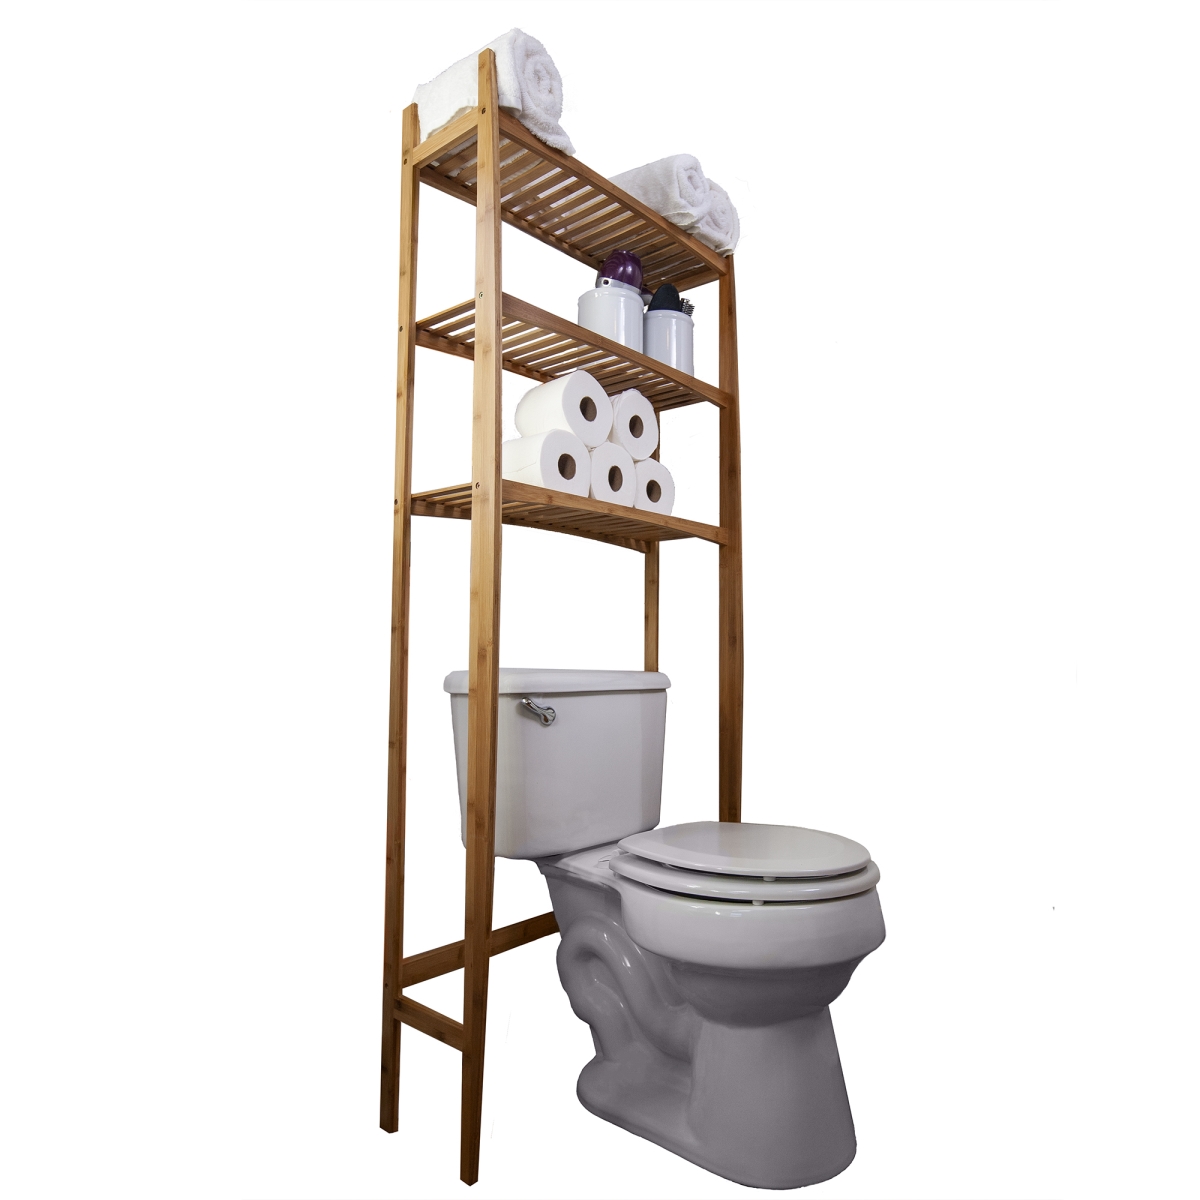 Hx-71096 Natural Bamboo Space Saver For Bathroom